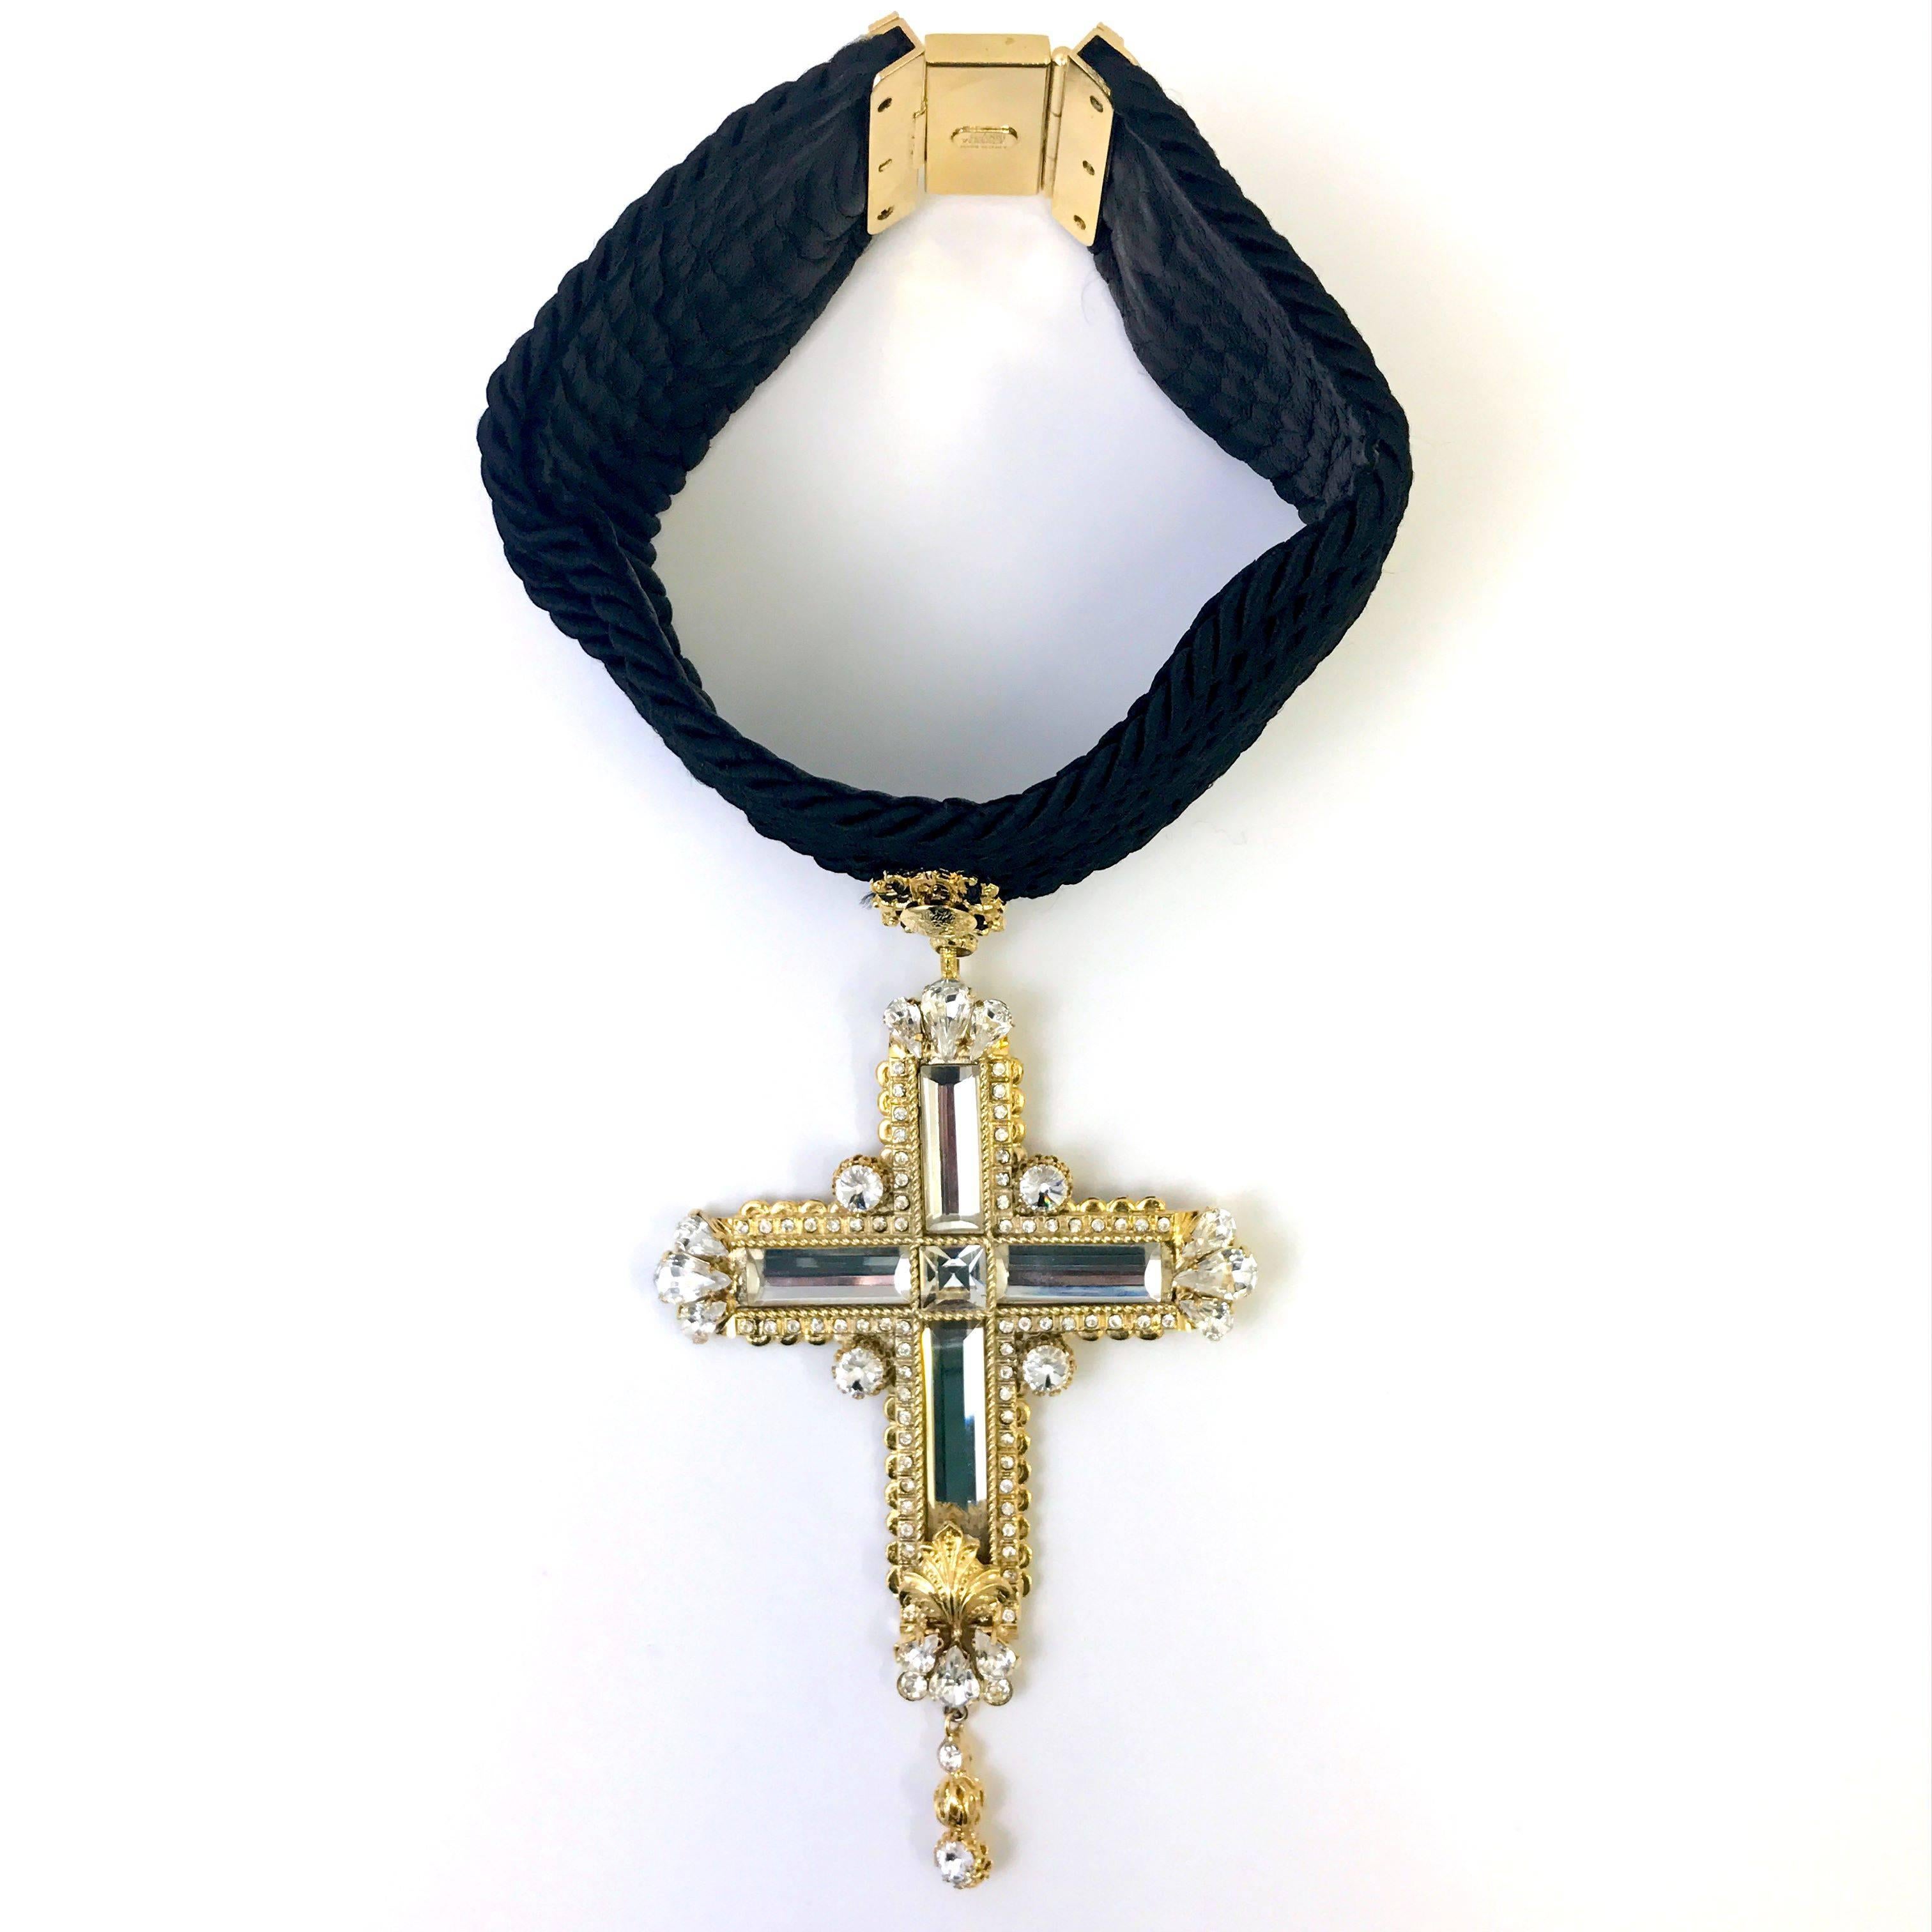 This is an extremely beautiful and rare statement choker from Gianni Versace. The handcrafted piece features a thick rope choker with a stunning and intricately made cross pendent dropping from the choker. The gold tone cross and rhinestone accents